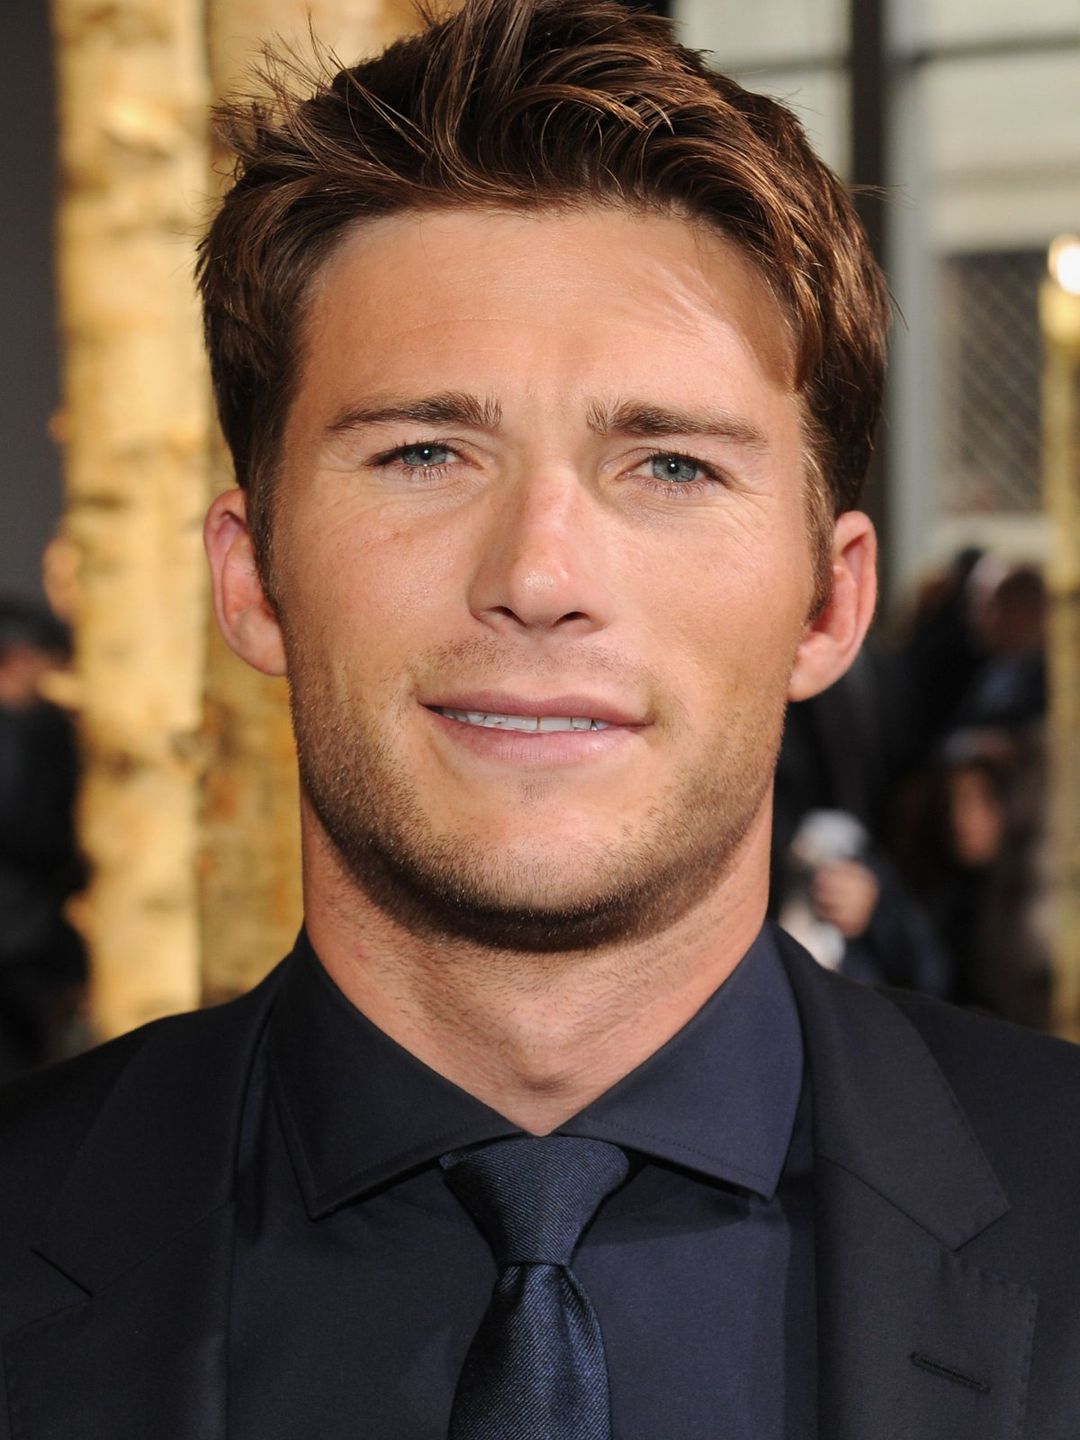 Scott Eastwood who is his mother